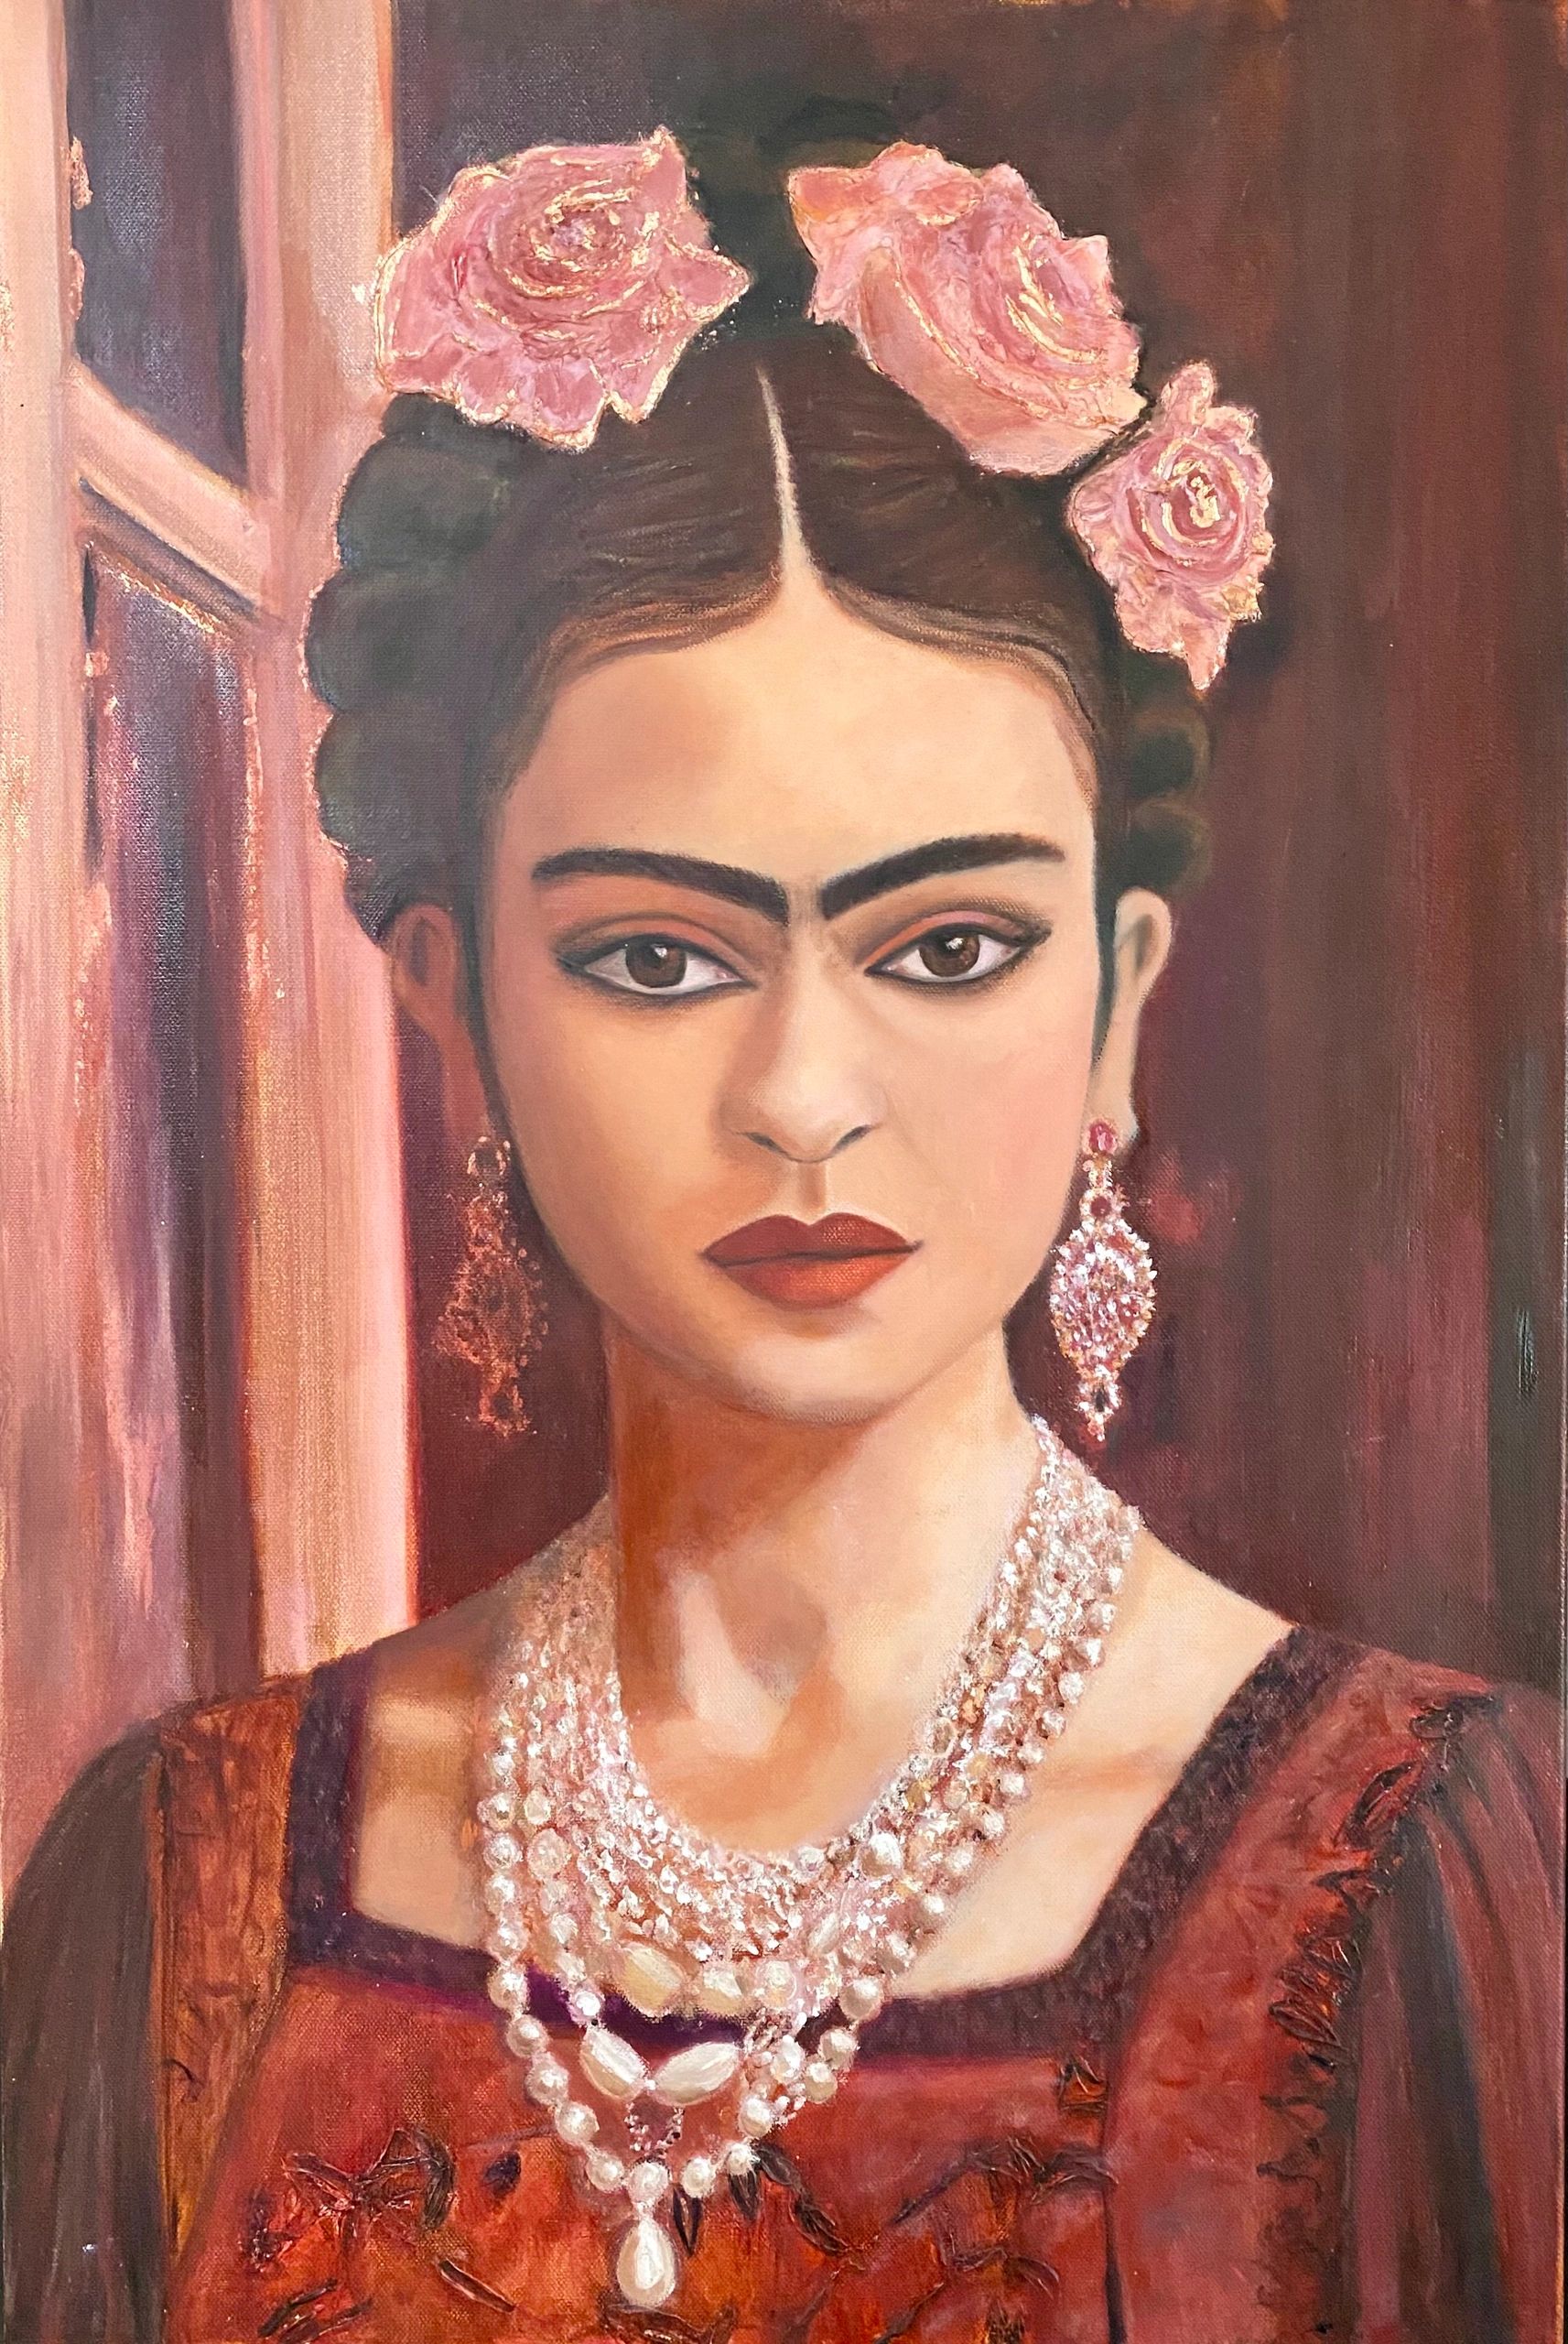 Painting of Frida Kahlo the Mexican artist, with Pink roses in her hair and pearl necklace.